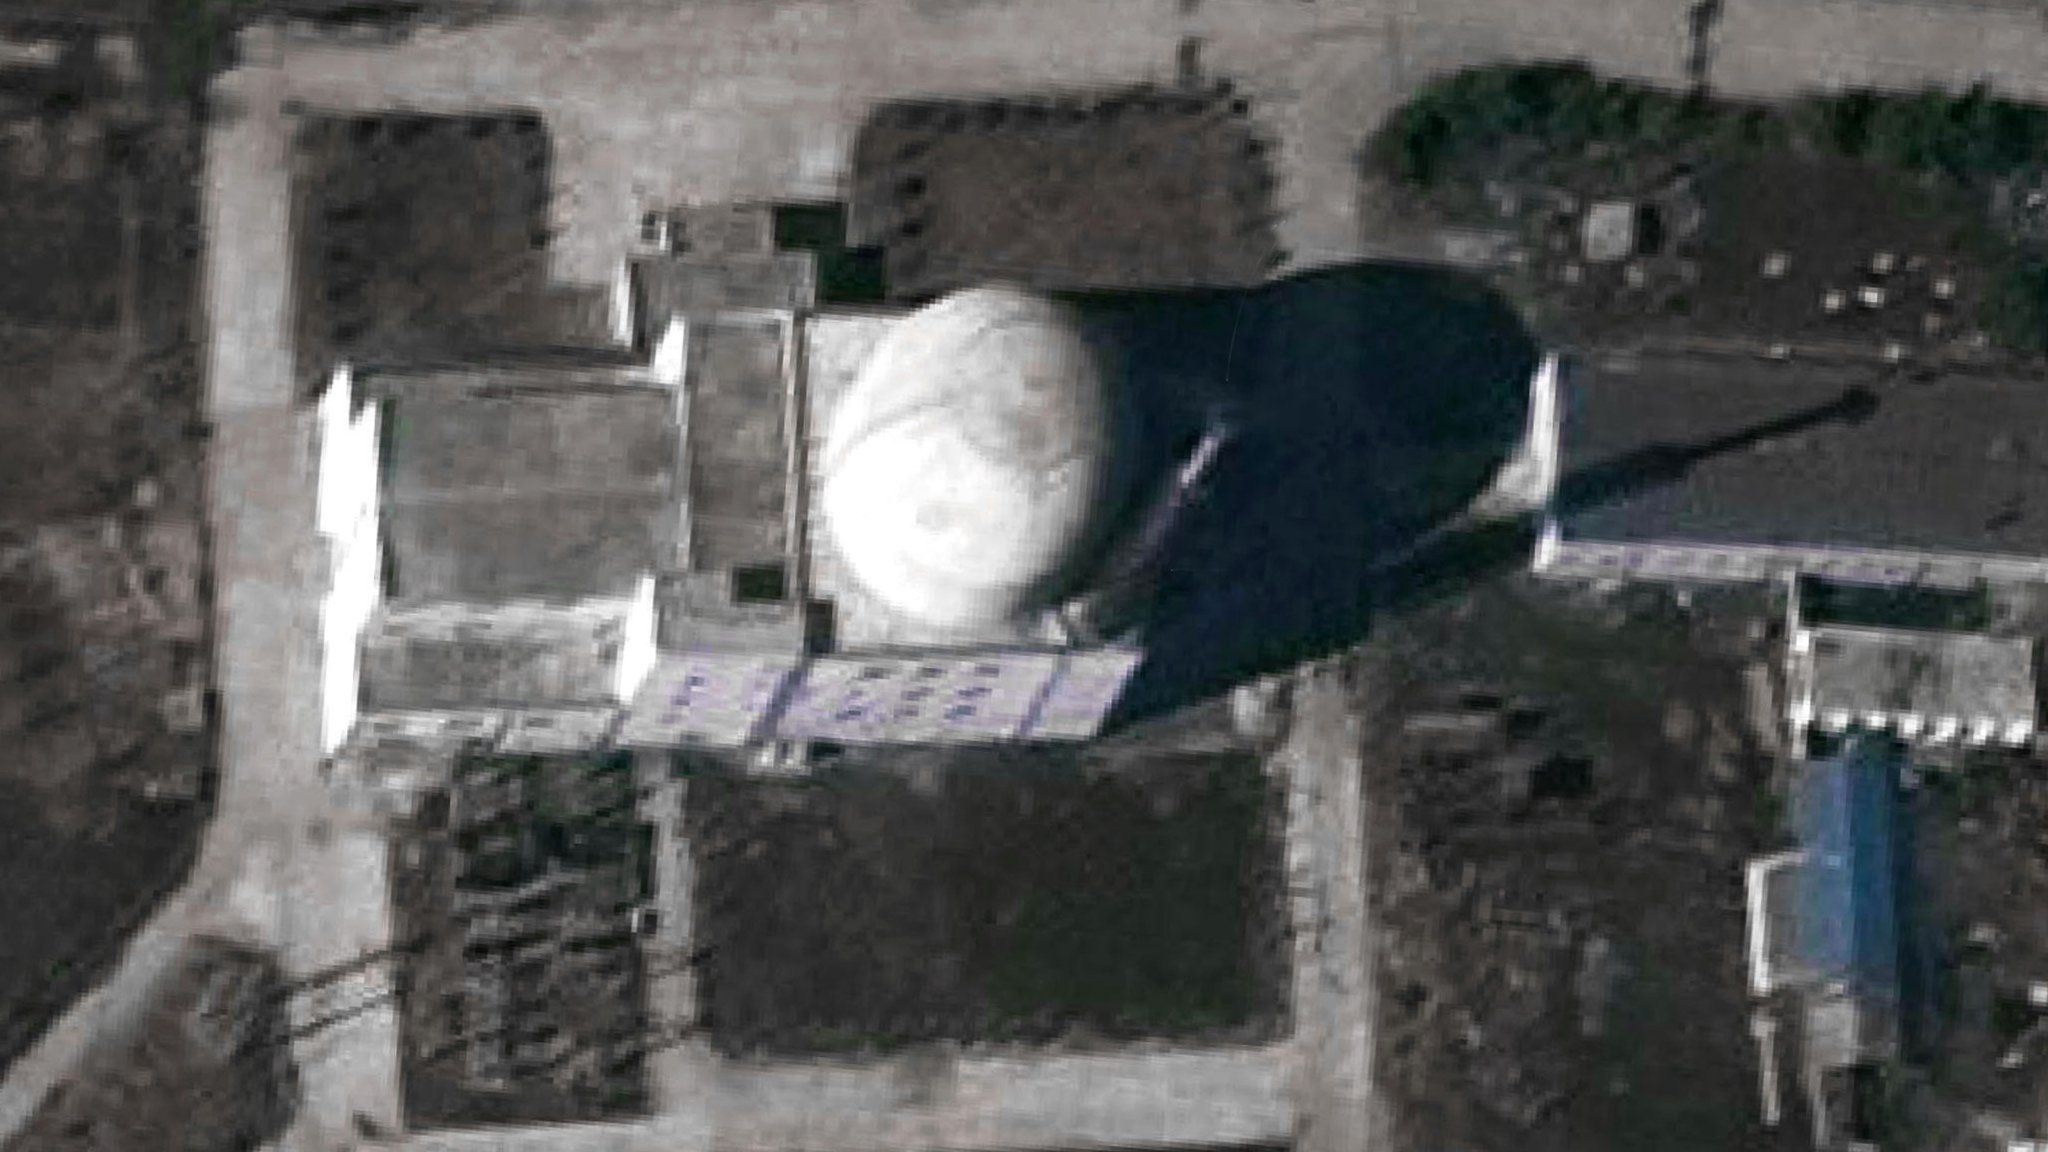 DigitalGlobe imagery showing emissions from the stack at the Yongbyon experimental light water reactor